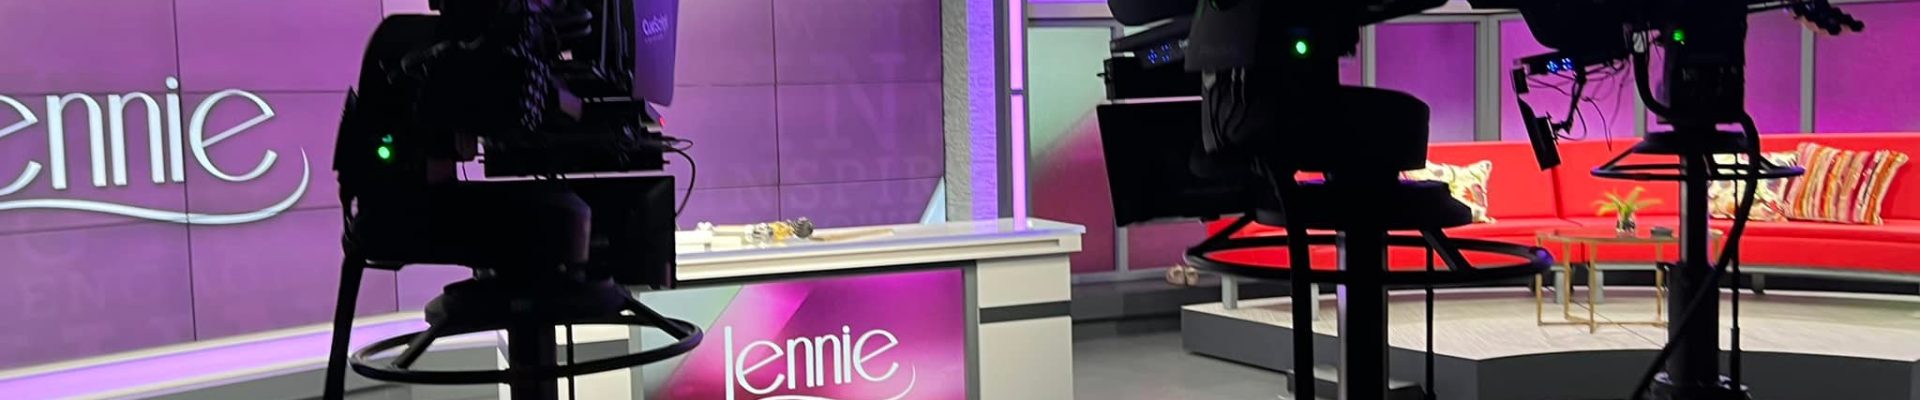 TV studio with the name Jennie on the wall